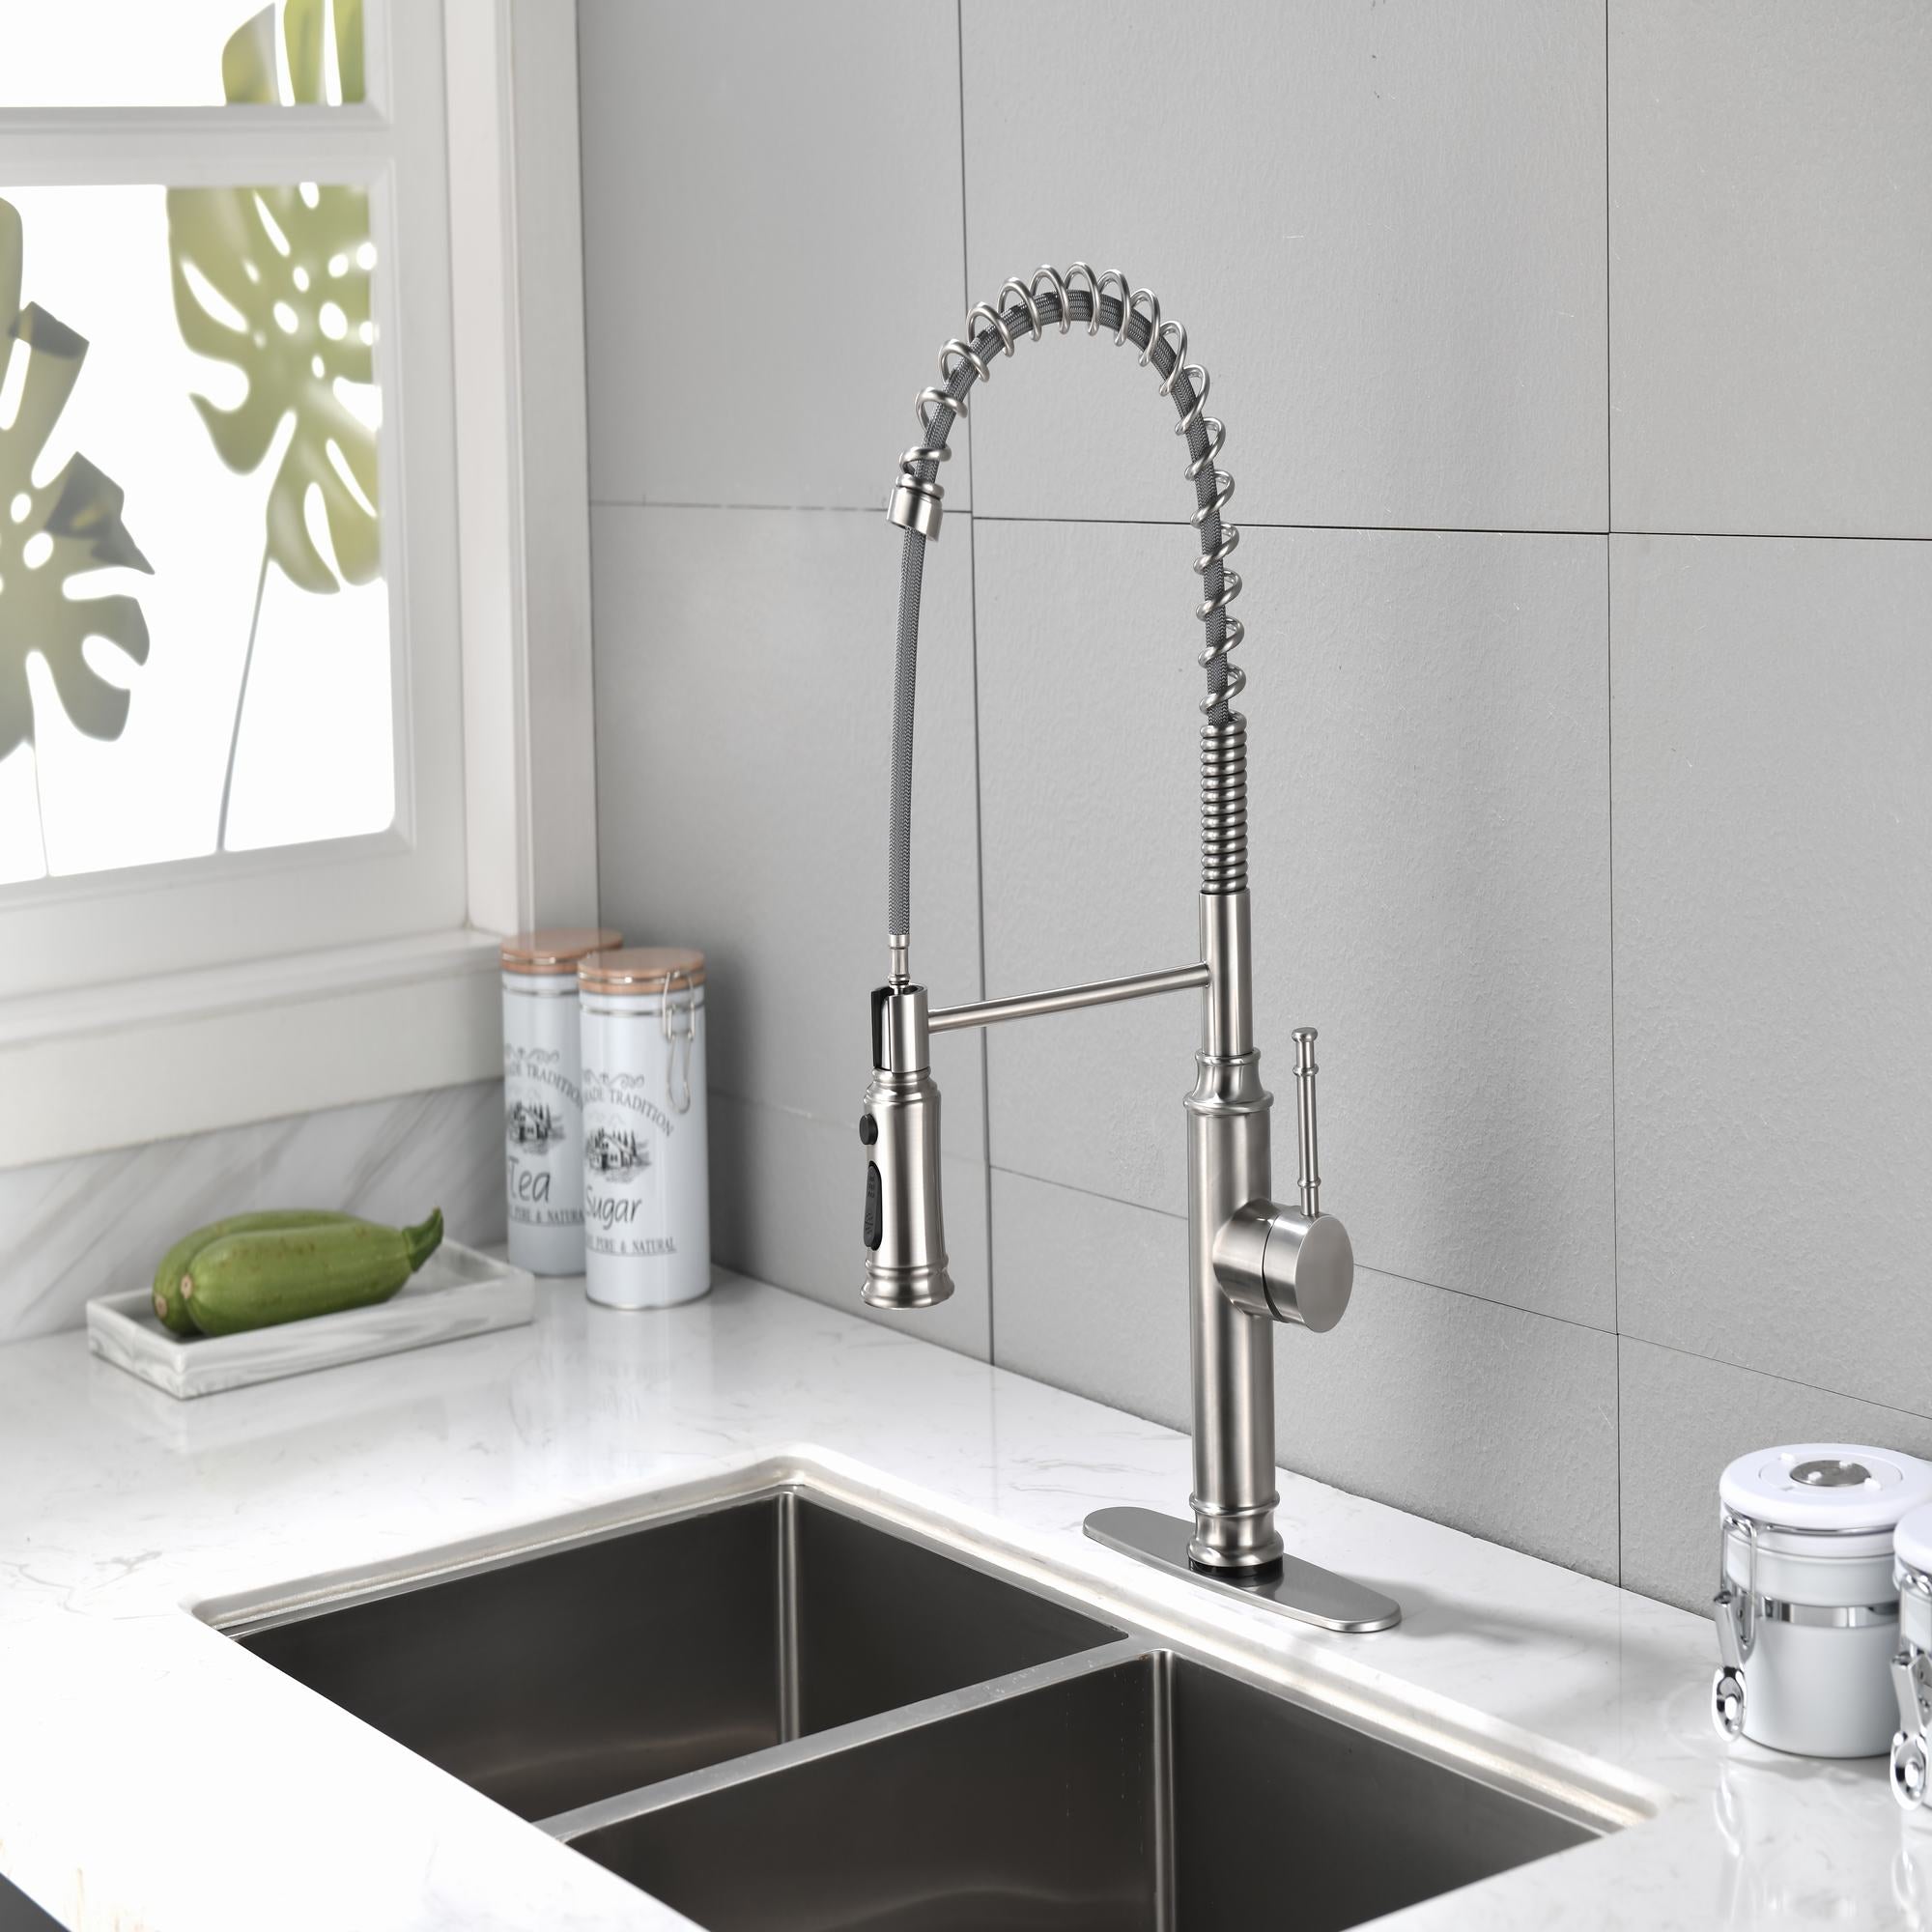 Single Handle Pull-down Kitchen Faucet with Sprayer Function